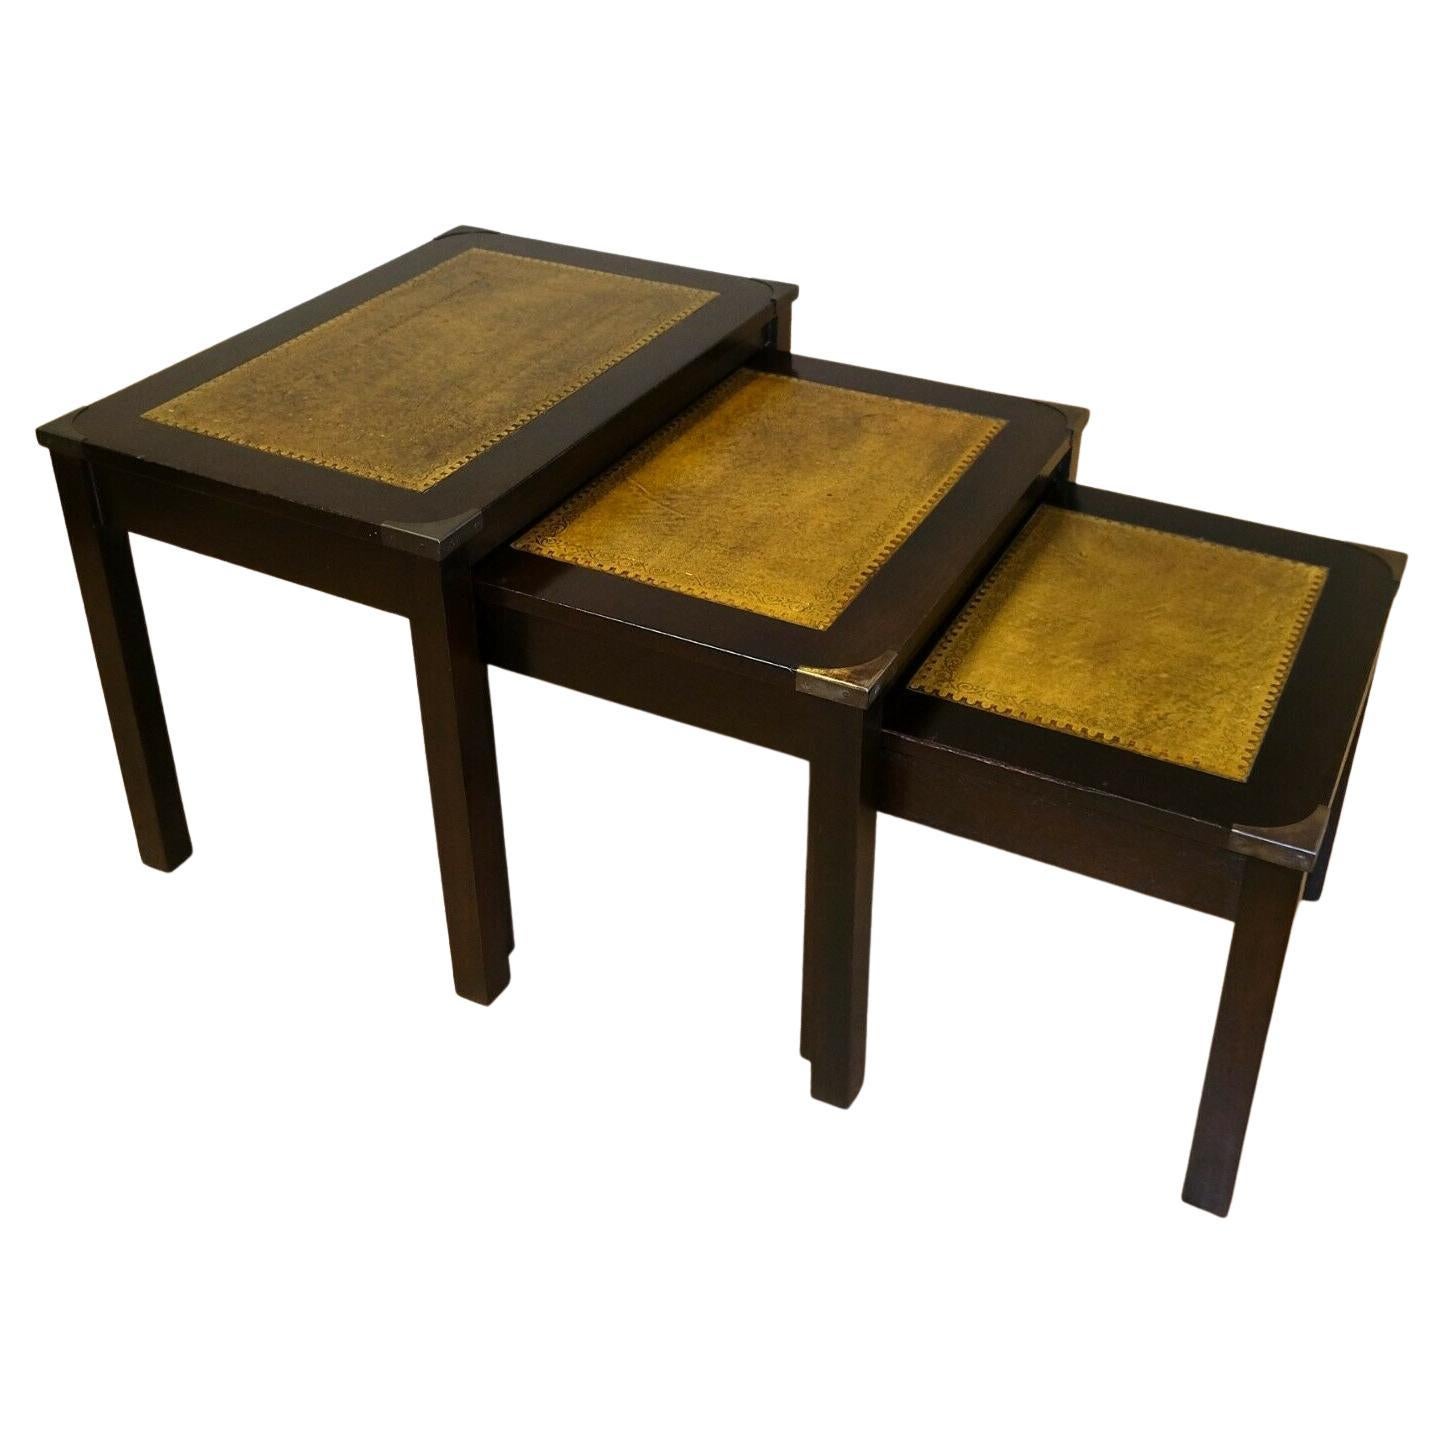 Stunning Bevan Funnell Hardwood Campaign Nest of Tables with Leather Tops